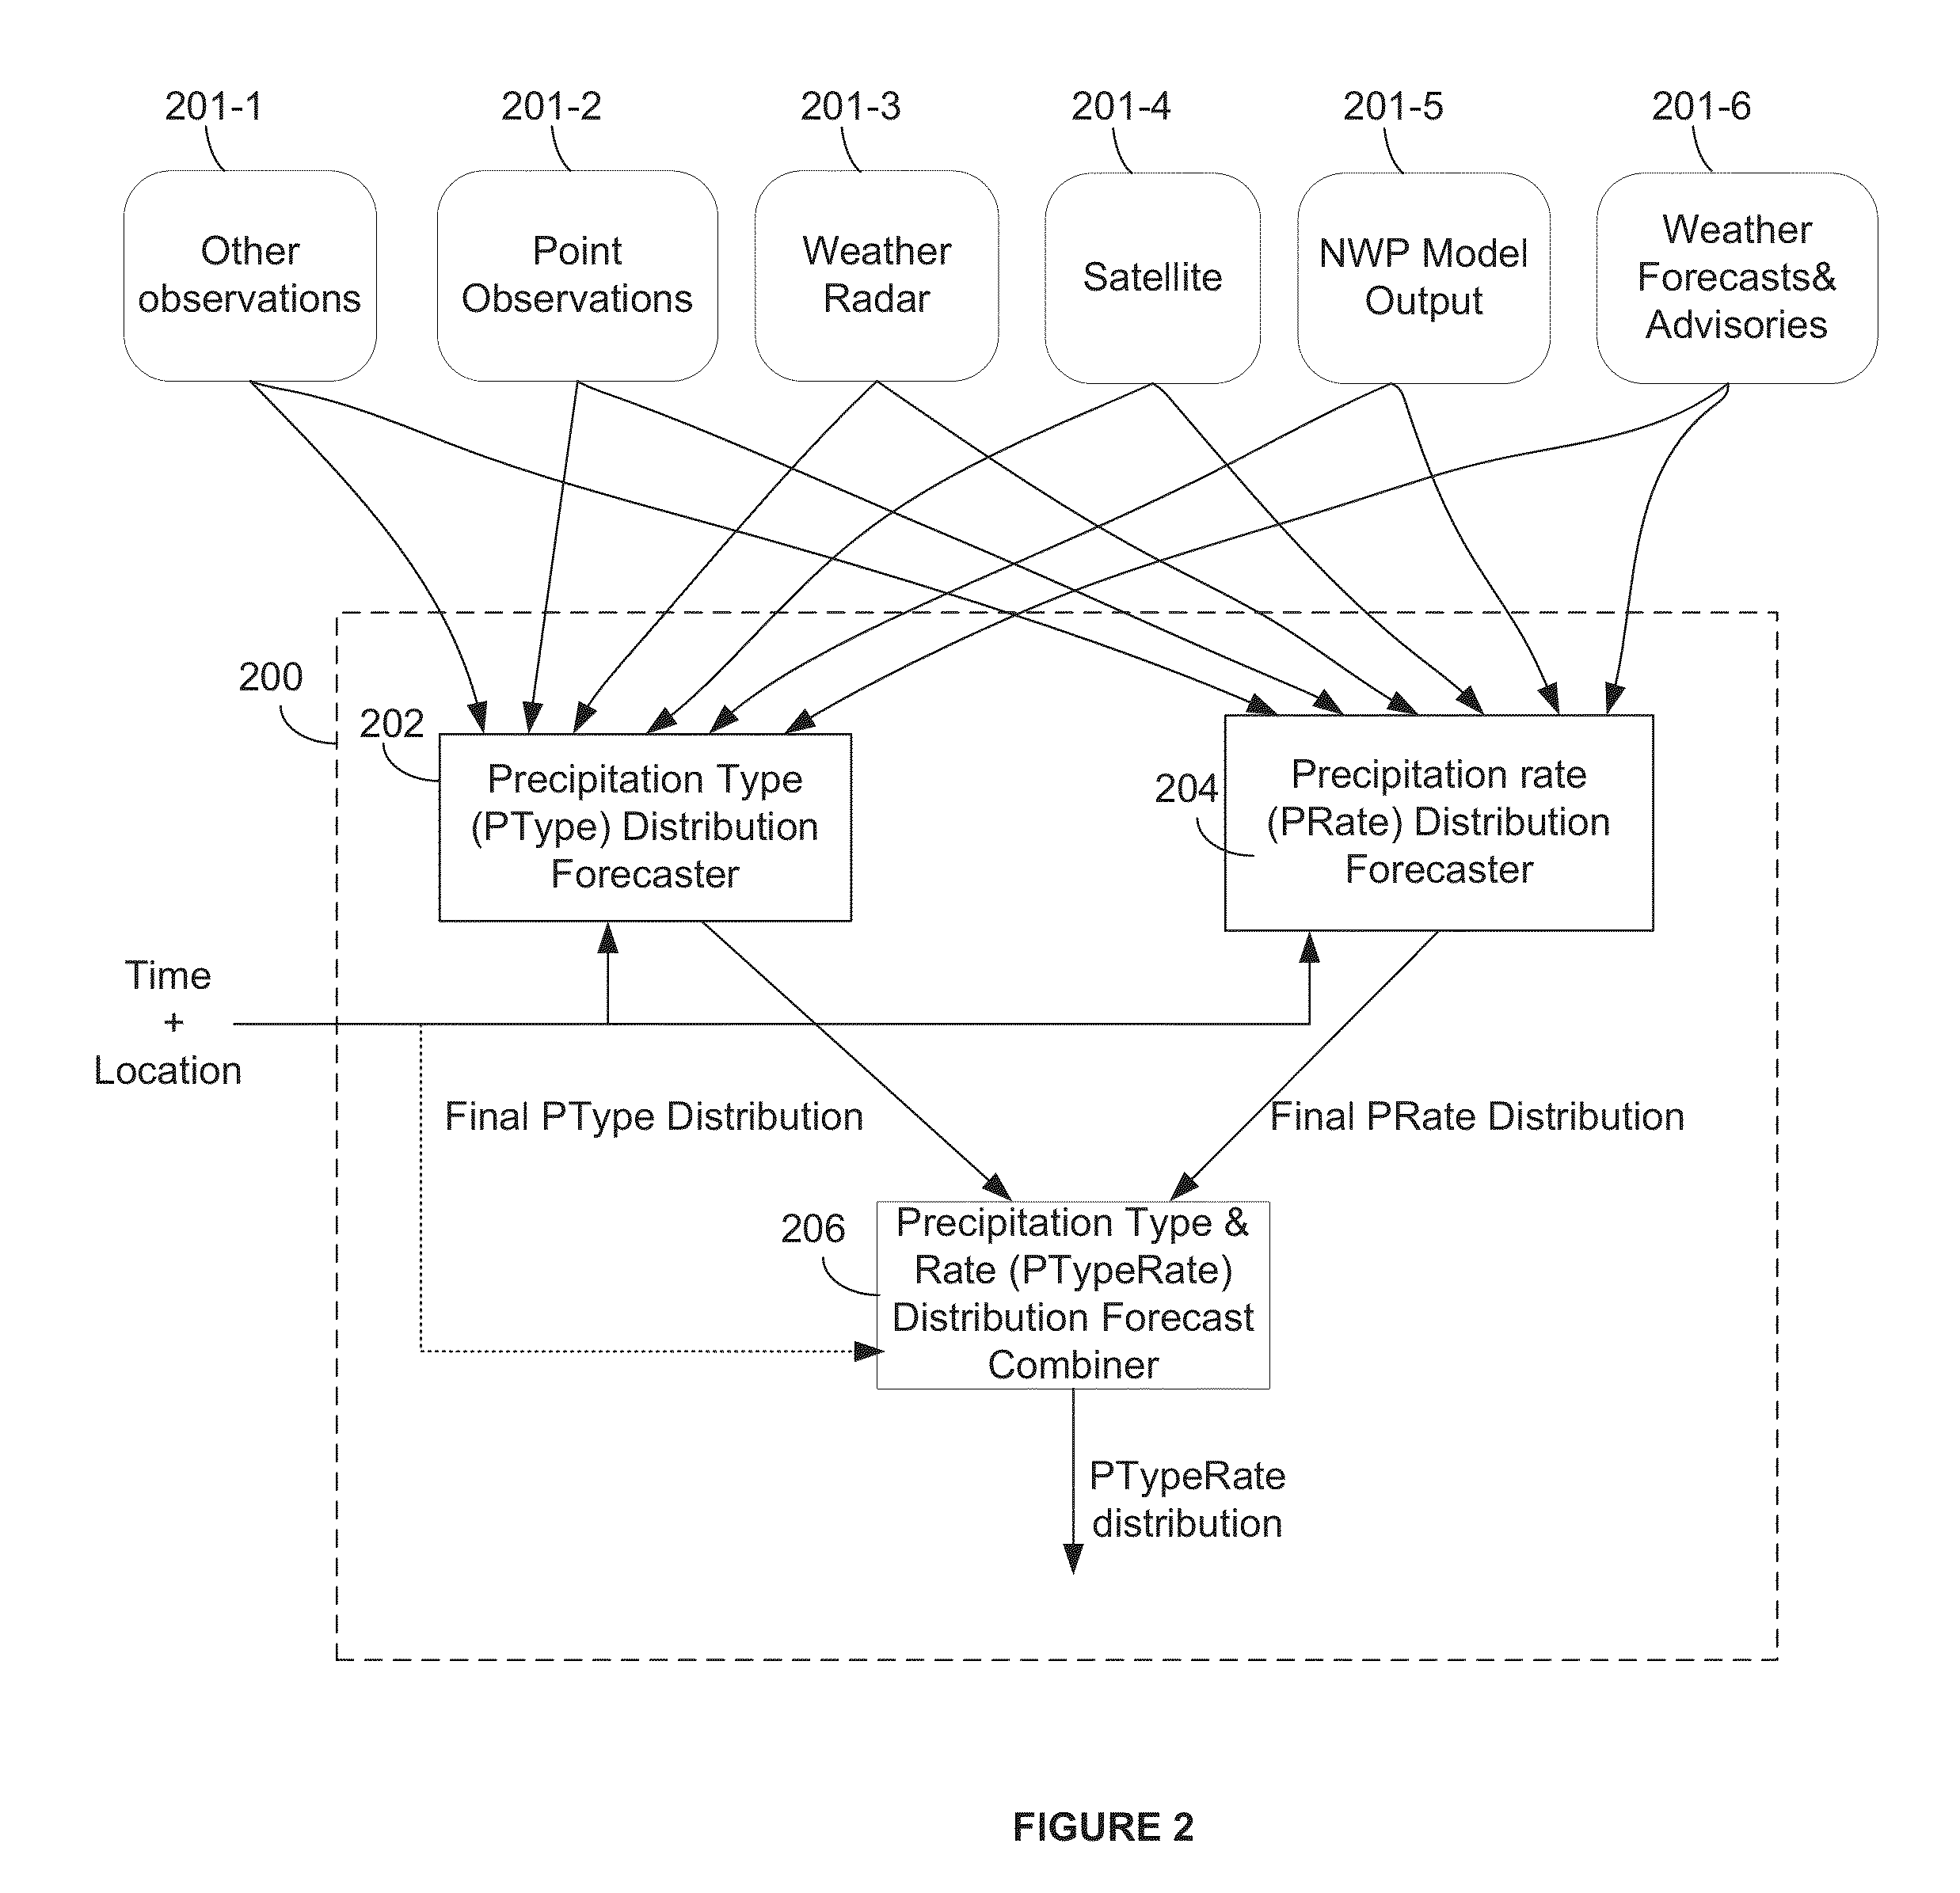 Method and system for displaying nowcasts along a route on a map